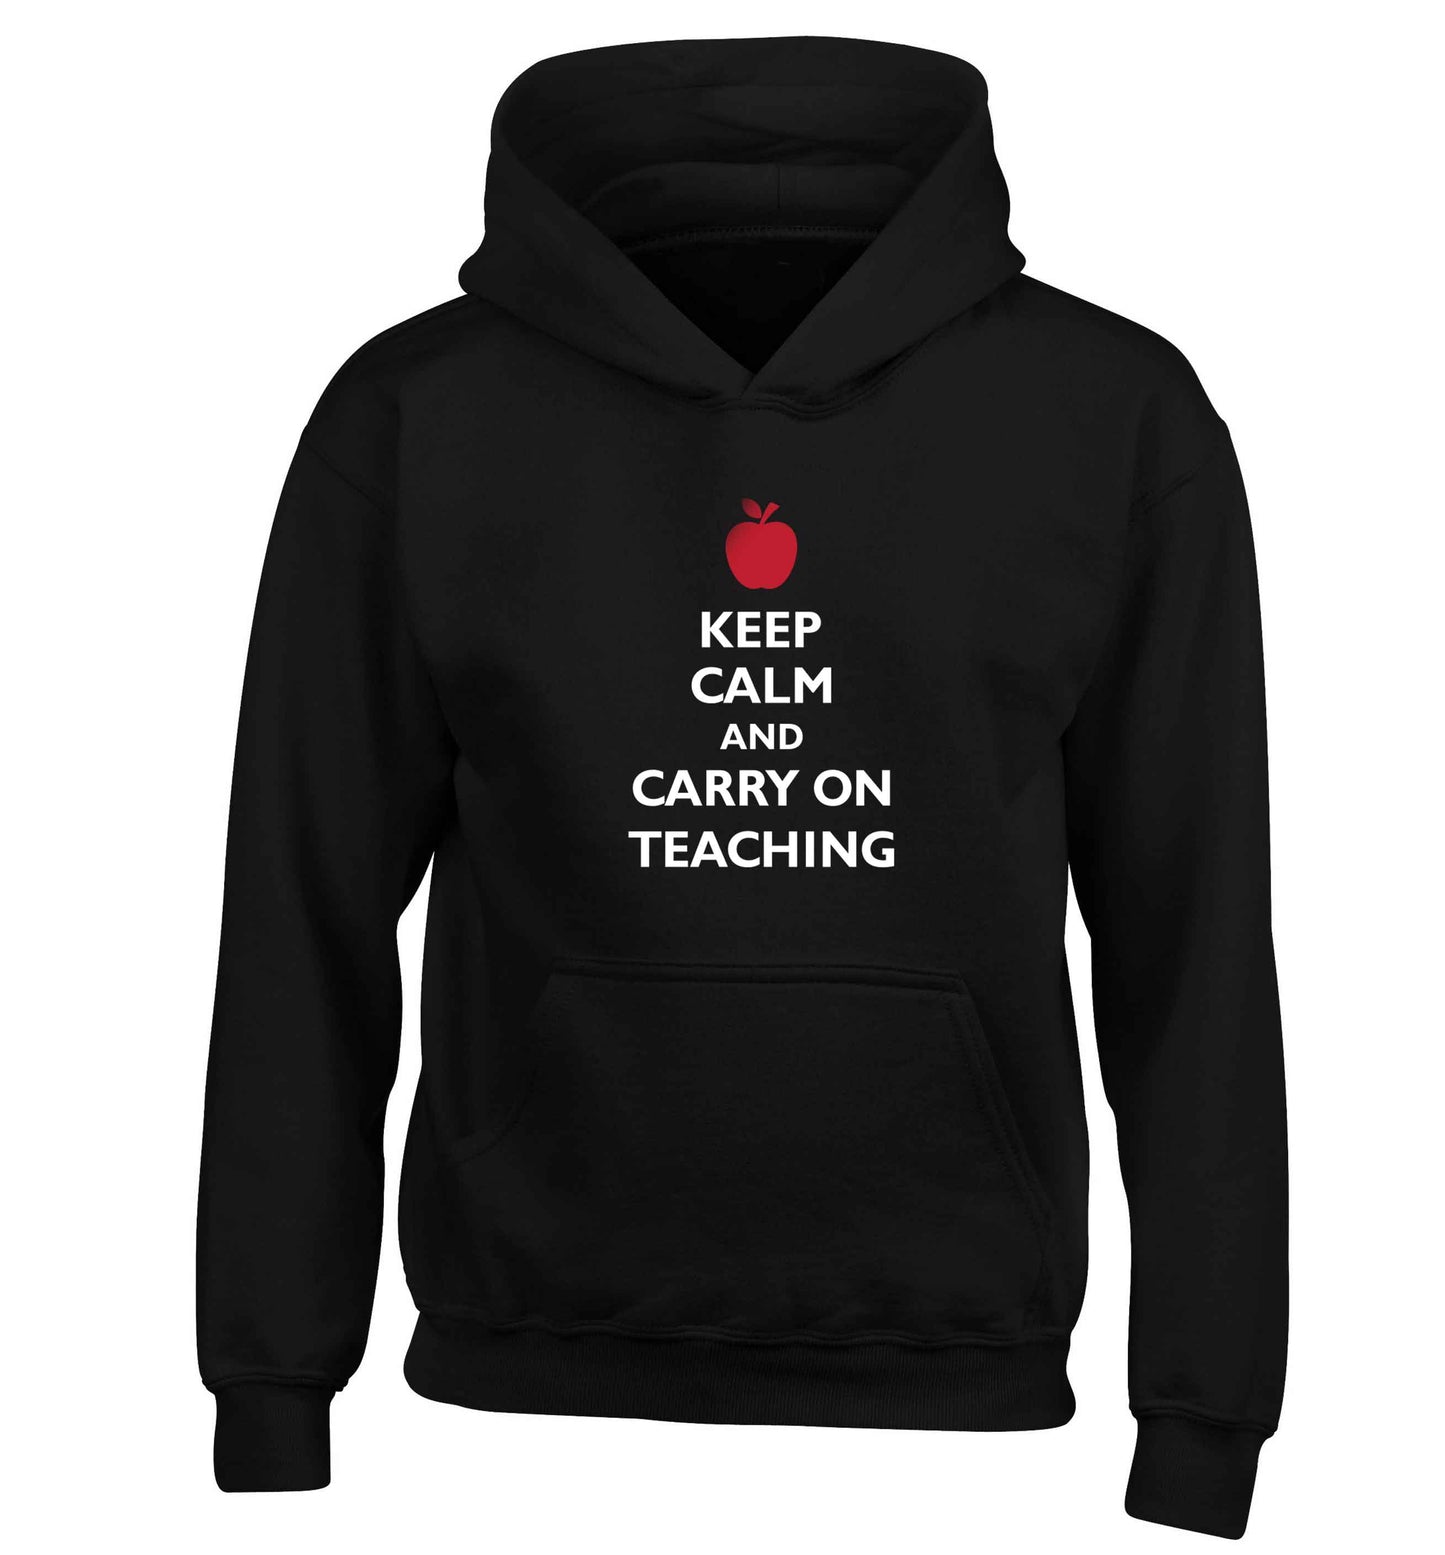 Keep calm and carry on teaching children's black hoodie 12-13 Years